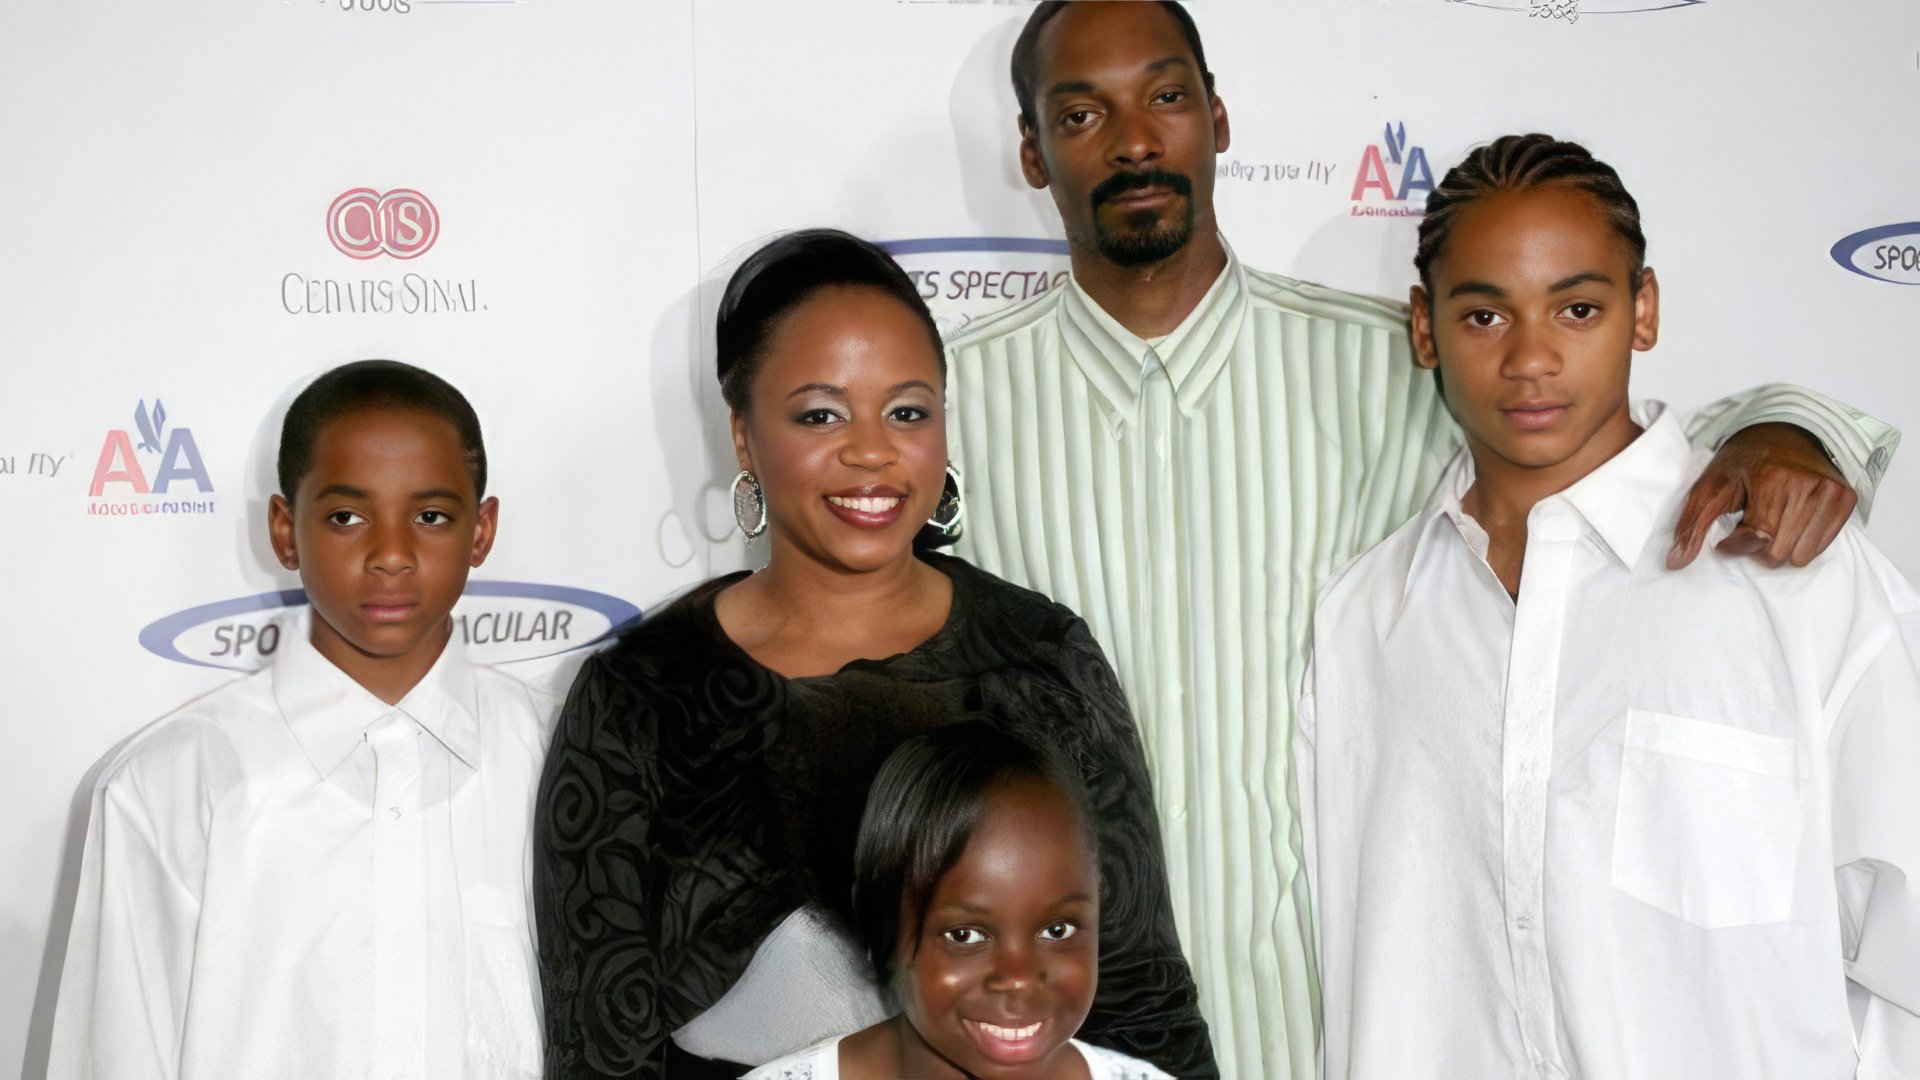 Snoop Dogg with wife and children